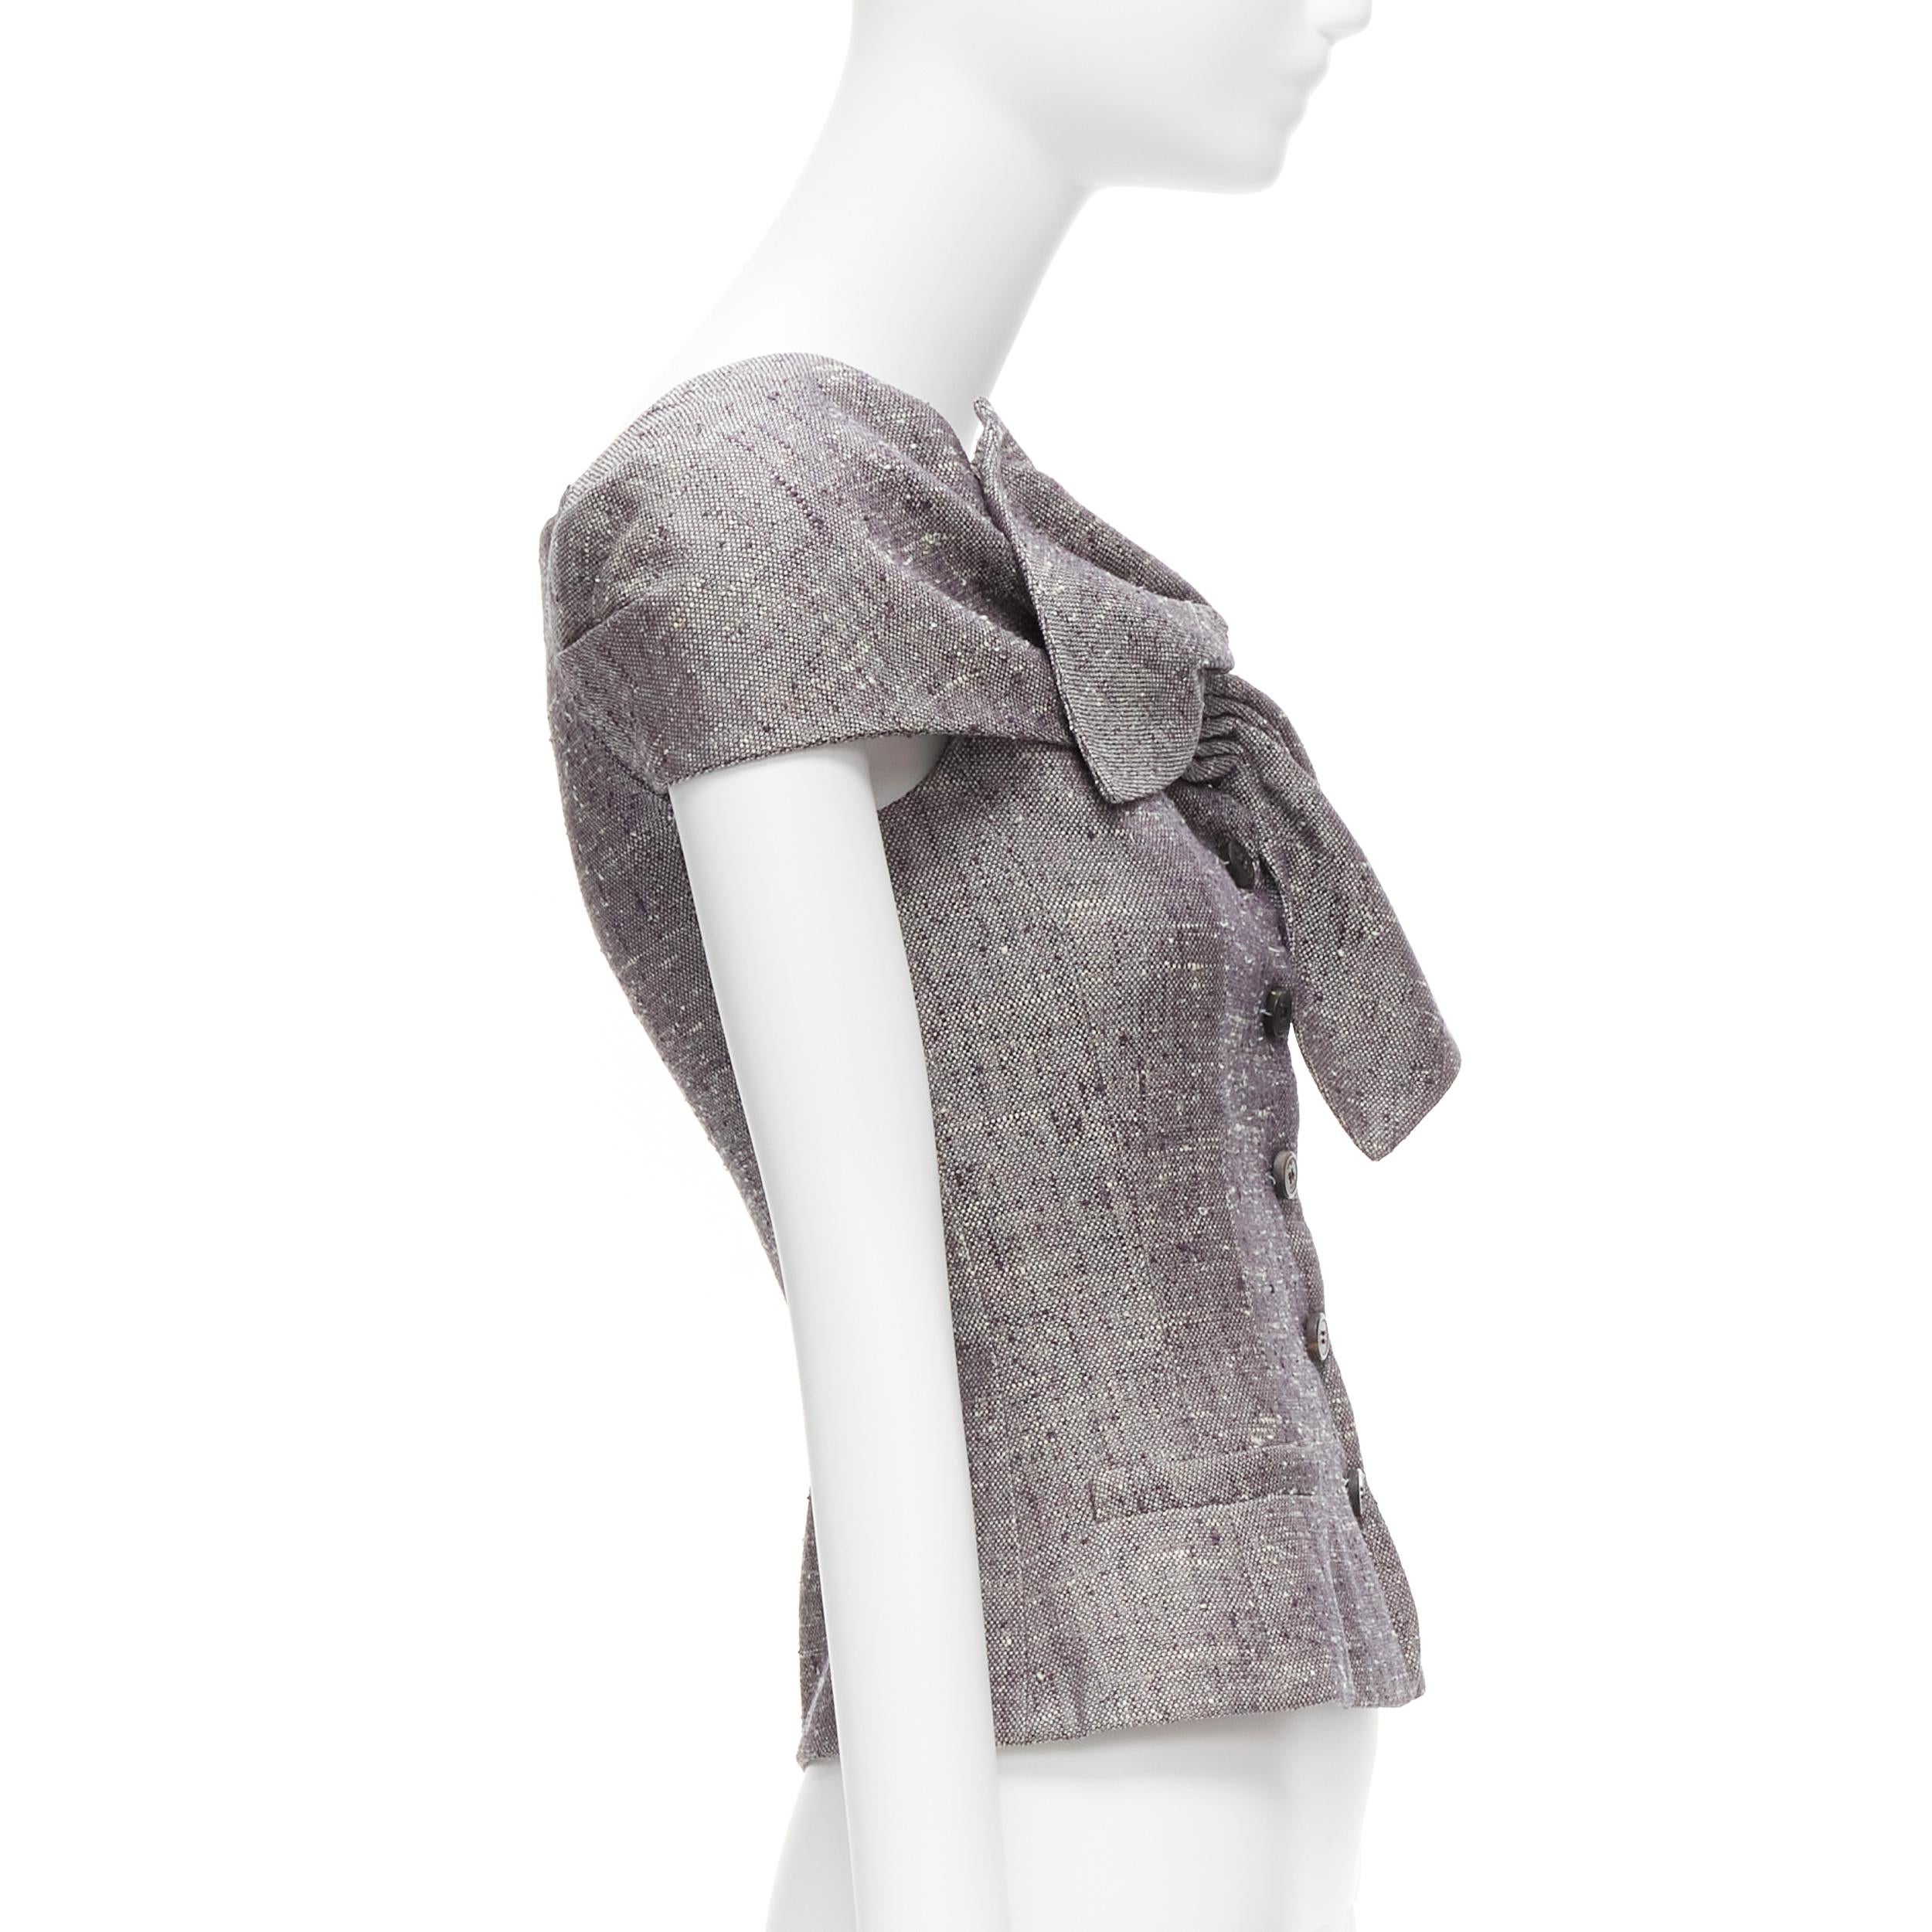 Women's CHRISTIAN DIOR Galliano Vintage grey boucle bow detail fitted jacket FR34 XS